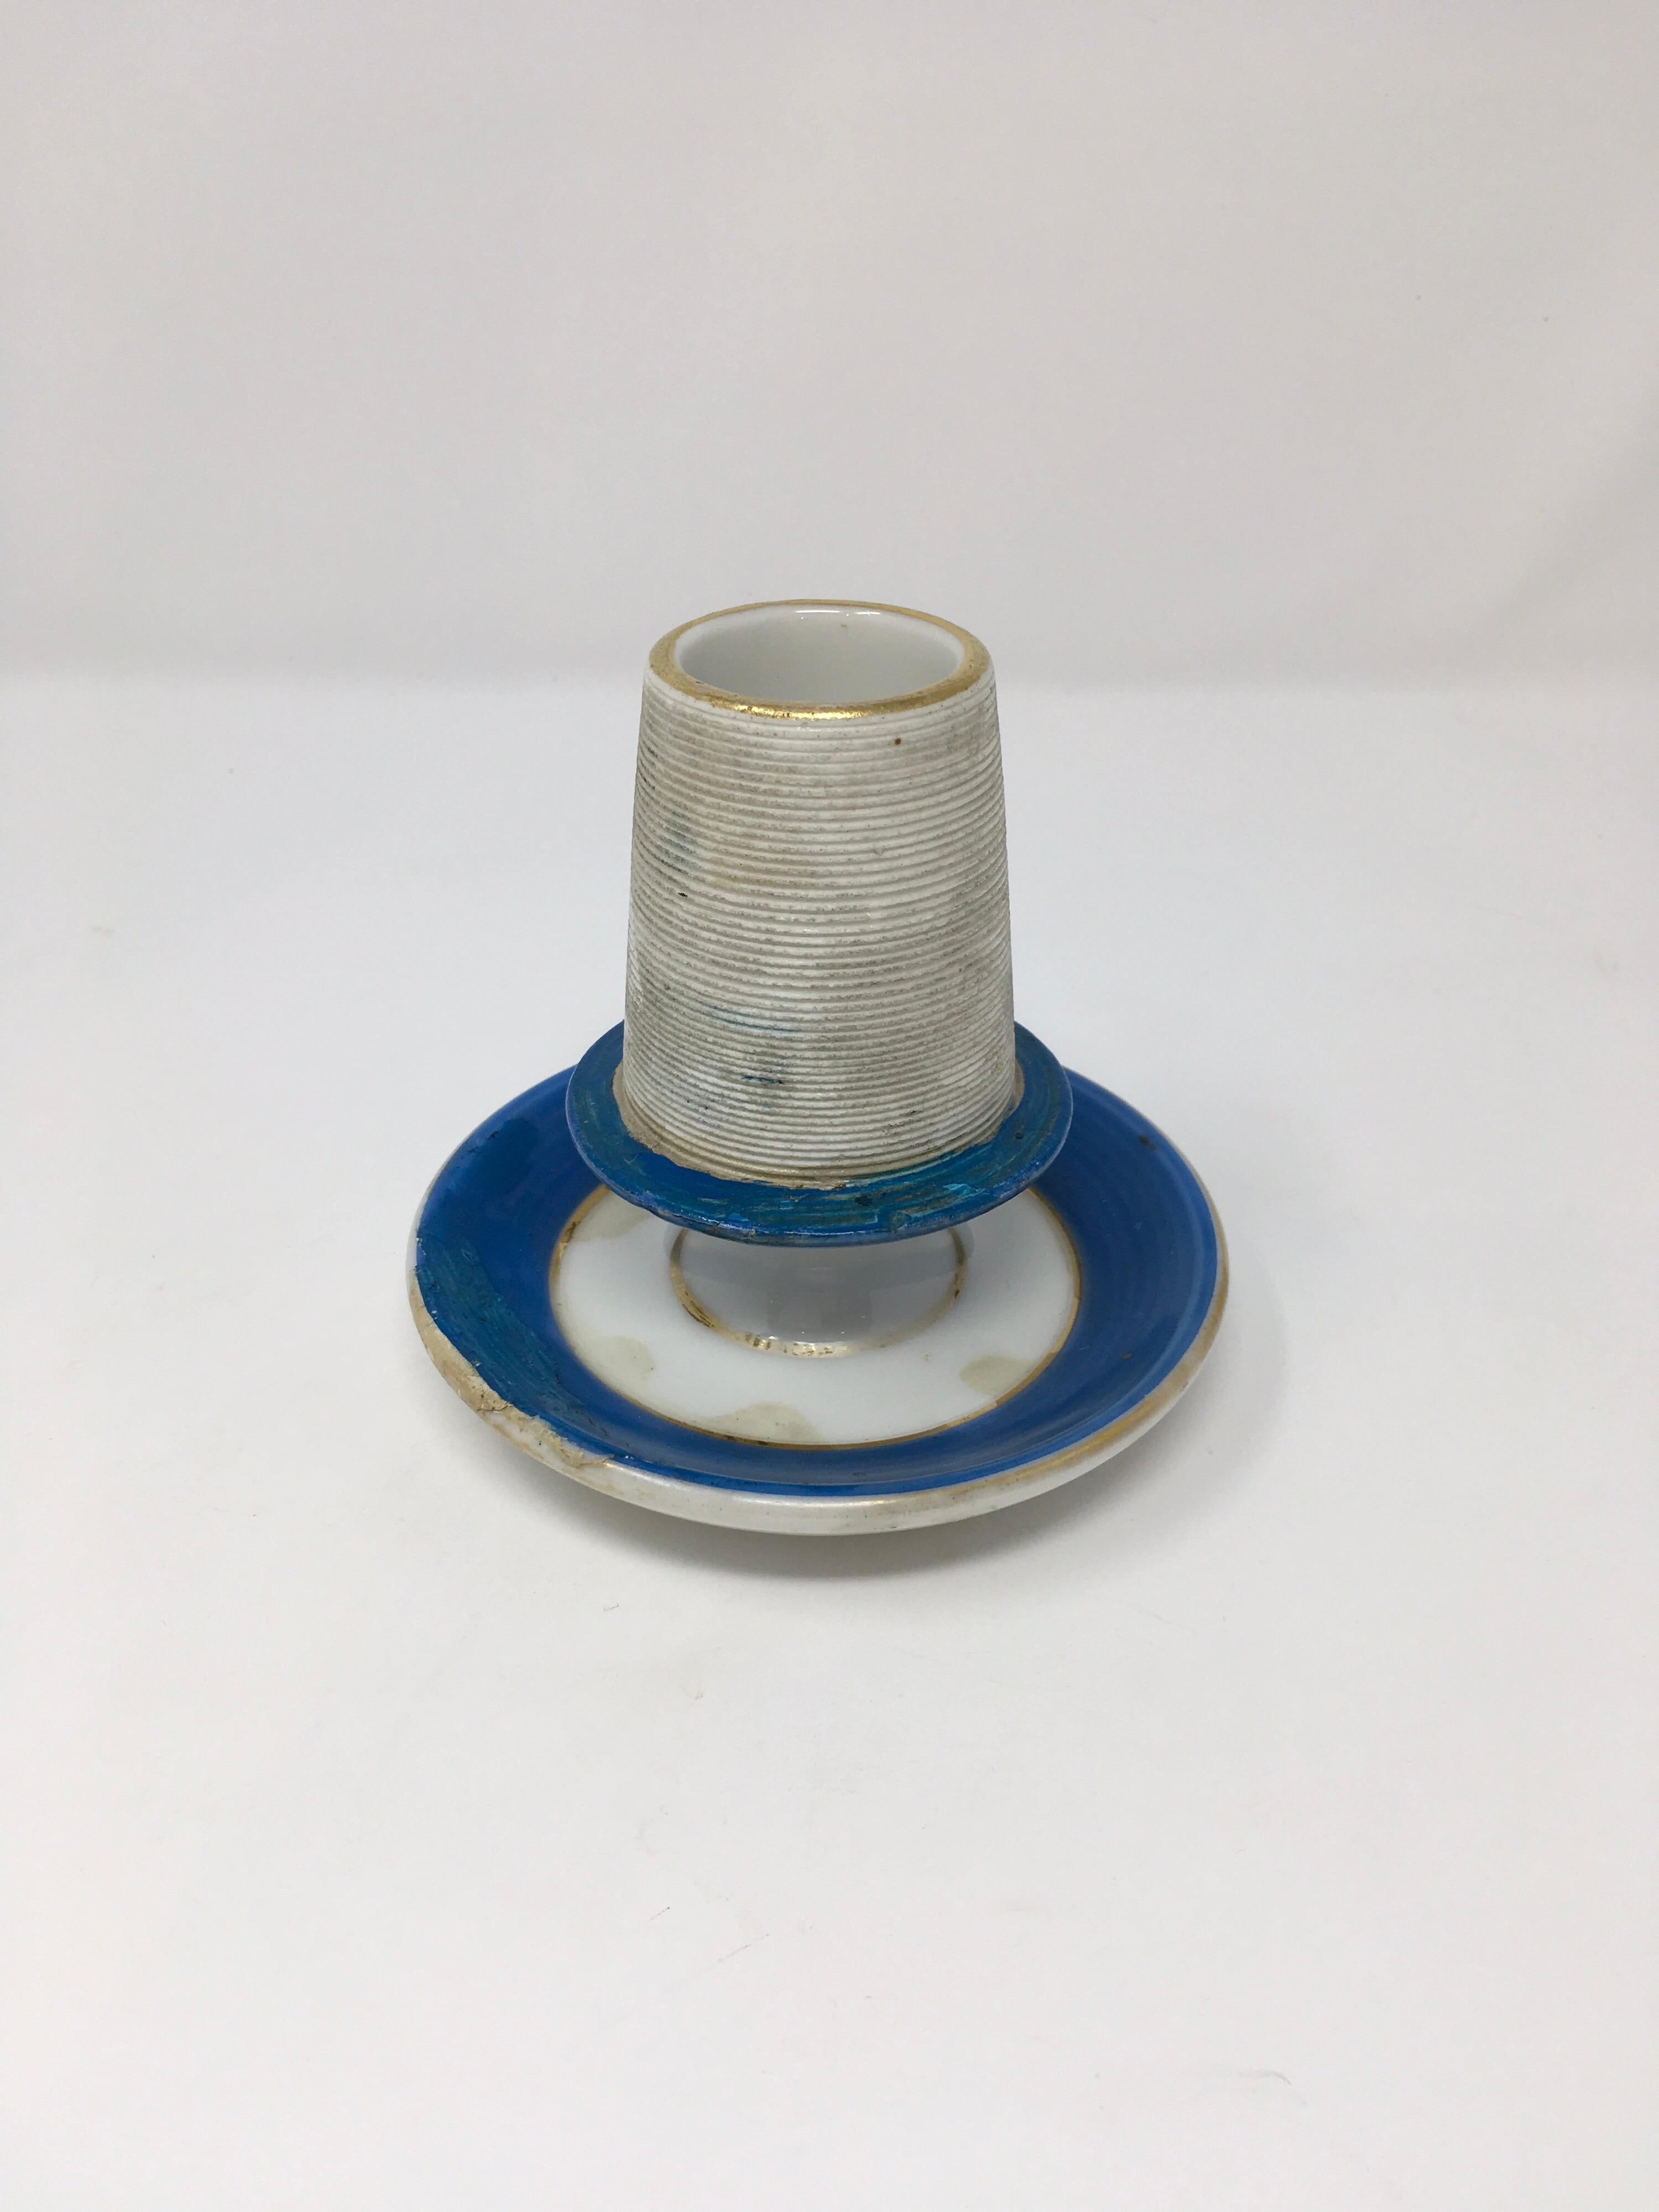 This is a French match holder and striker made of white porcelain with bands of blue around the top and base. A perfect gift for the collector or to start a collection of your own.